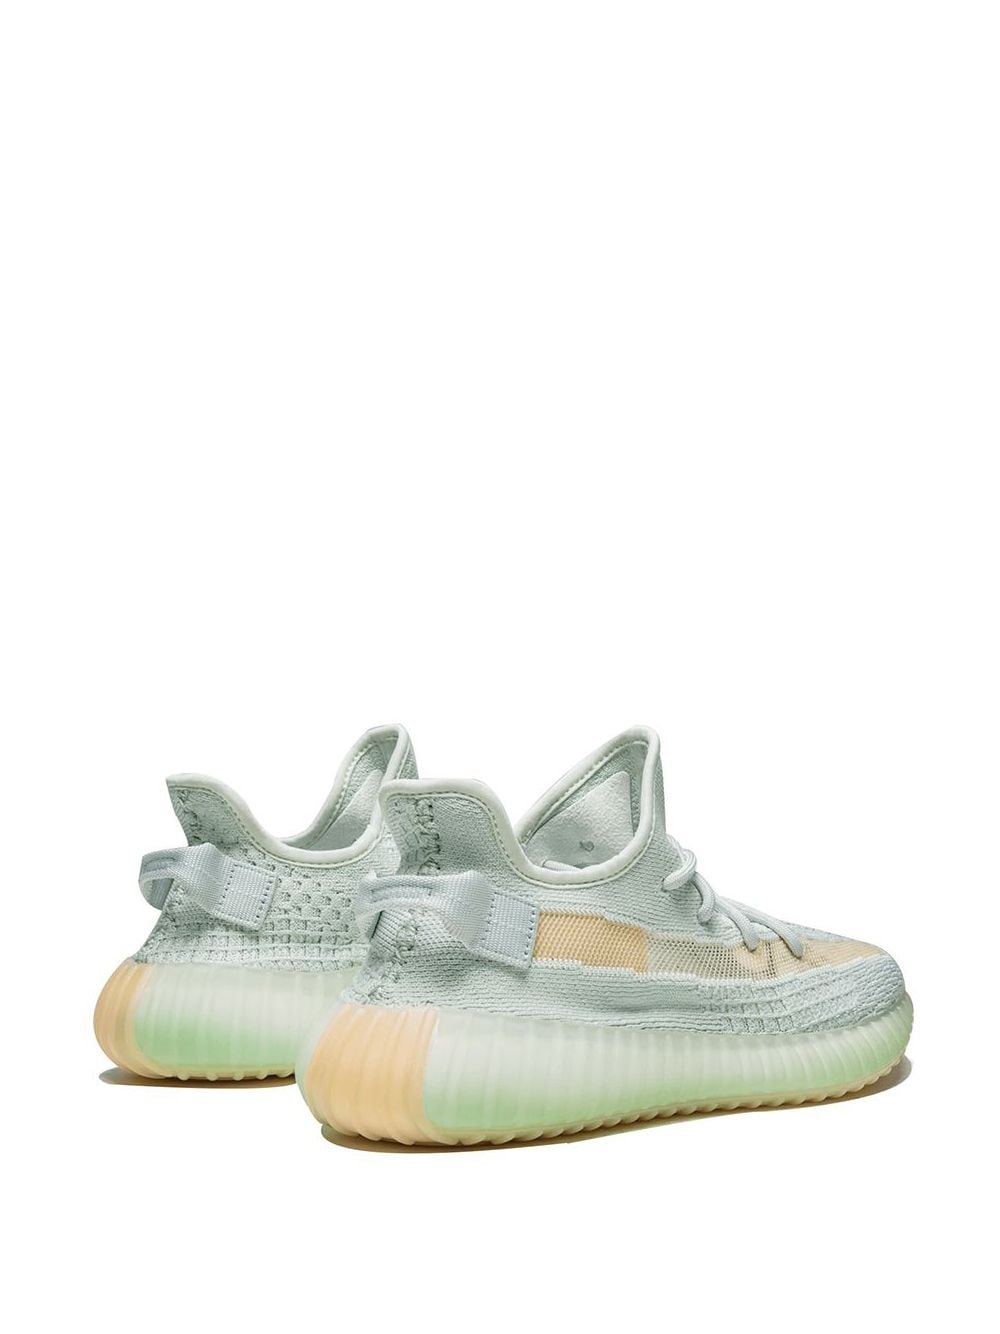 yeezy hyperspace for sale